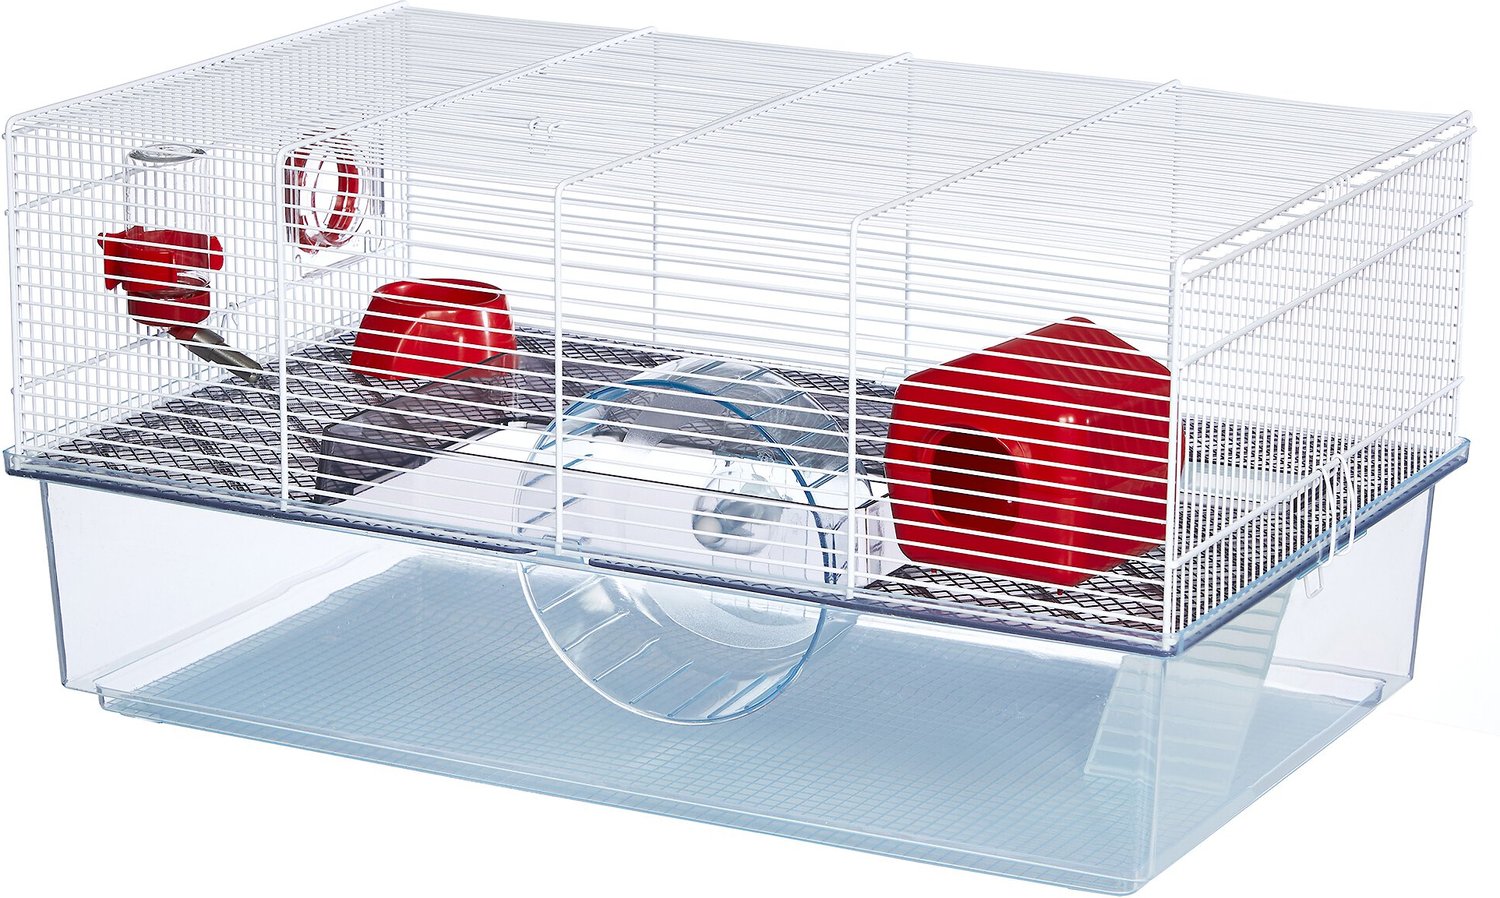 3. Chewy provides fast and free shipping on plastic hamster cages